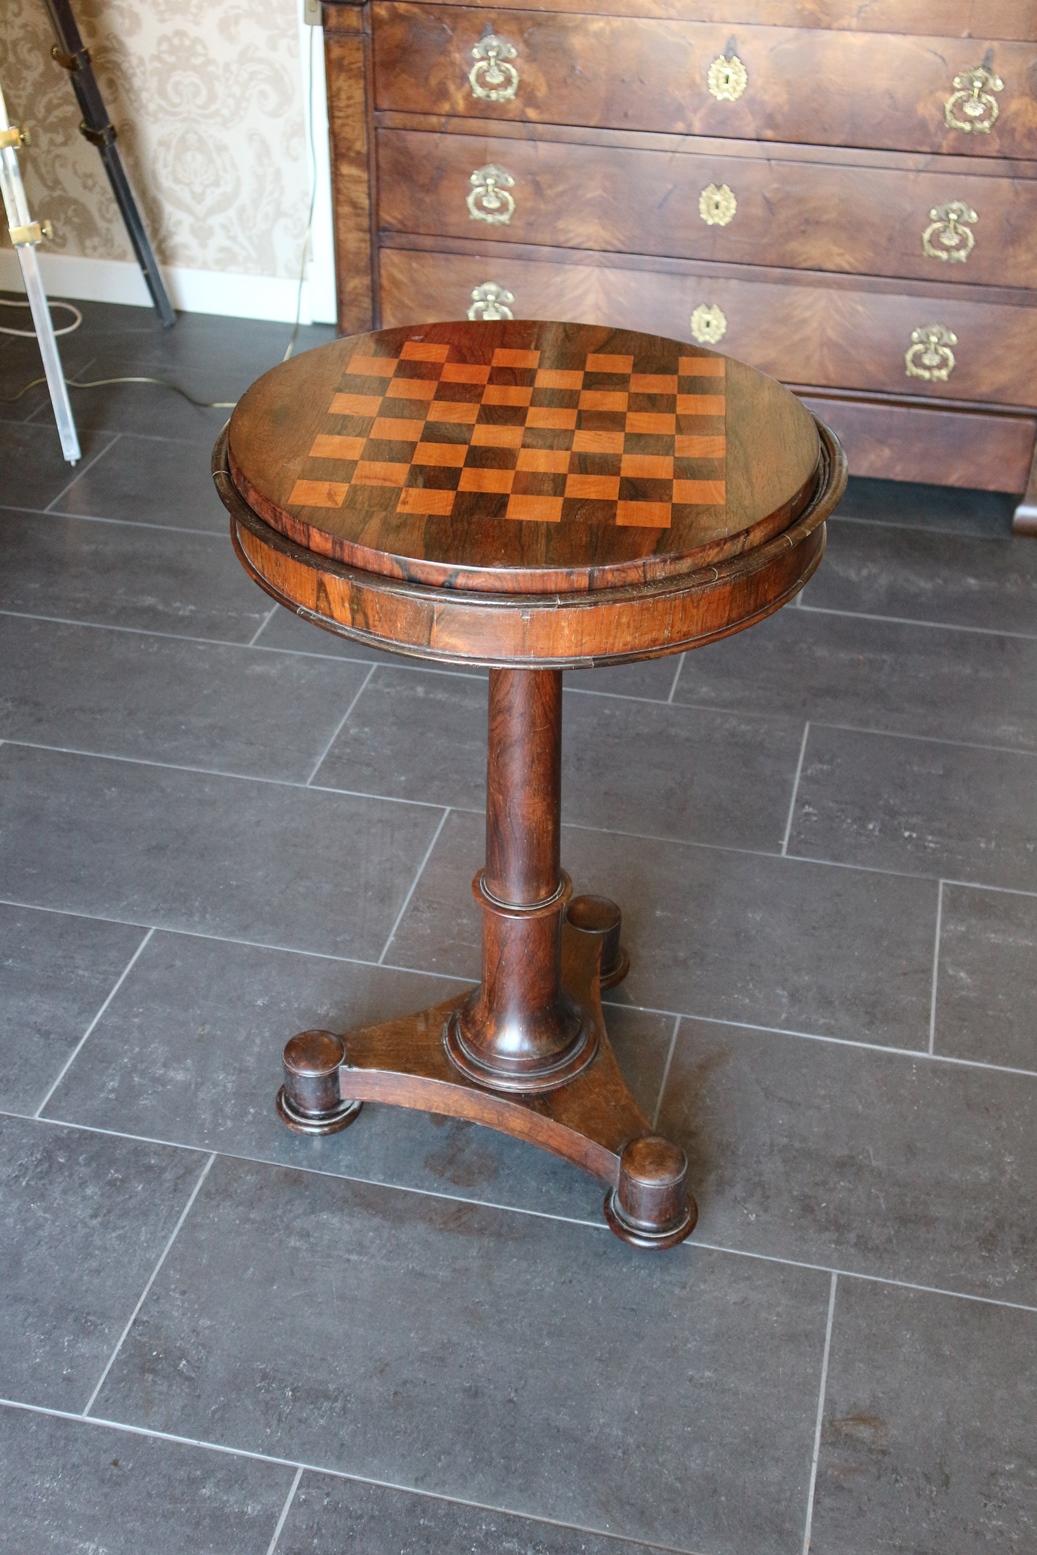 Beautiful 18th century antique rosewood wooden chess table in original condition. The sheet is reversible. With a chessboard on one side and rosewood on the other side. There is also a removable metal inner box.
Entirely in original condition. On